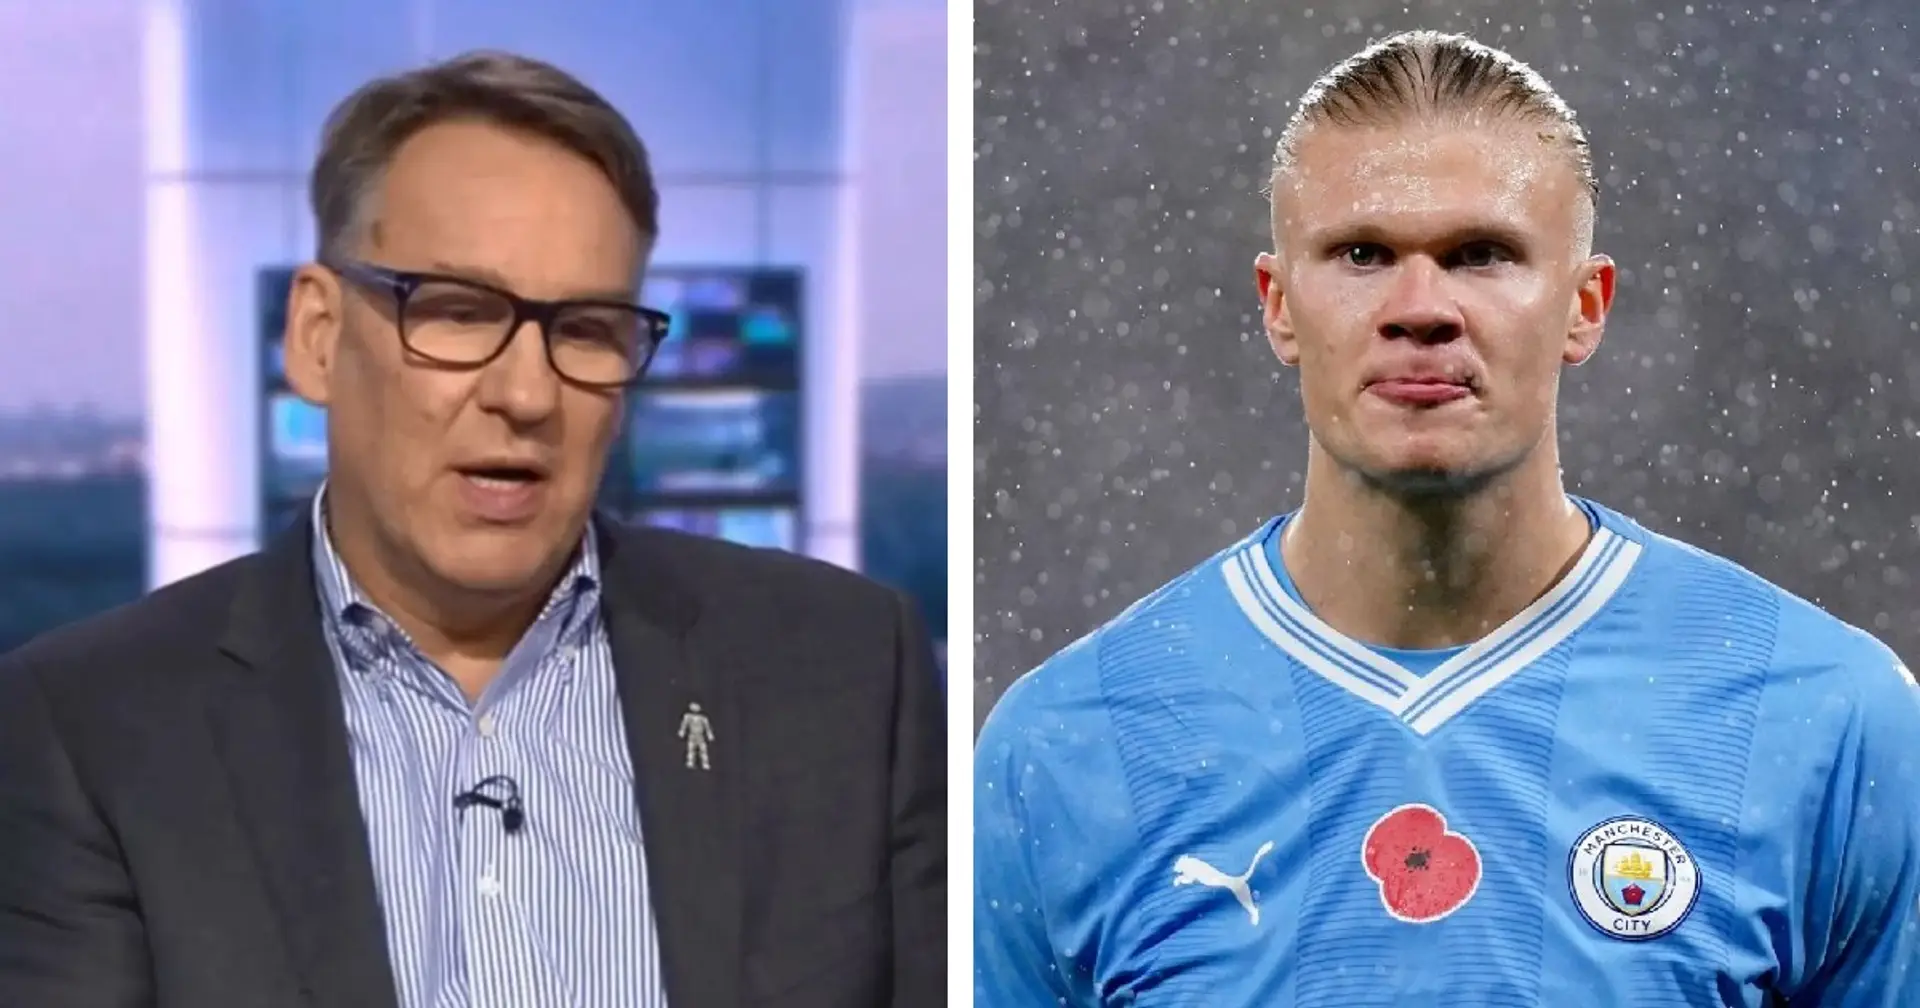 'He's been outstanding': Merson compares former Liverpool striker to Haaland – he has 12 PL goals this season